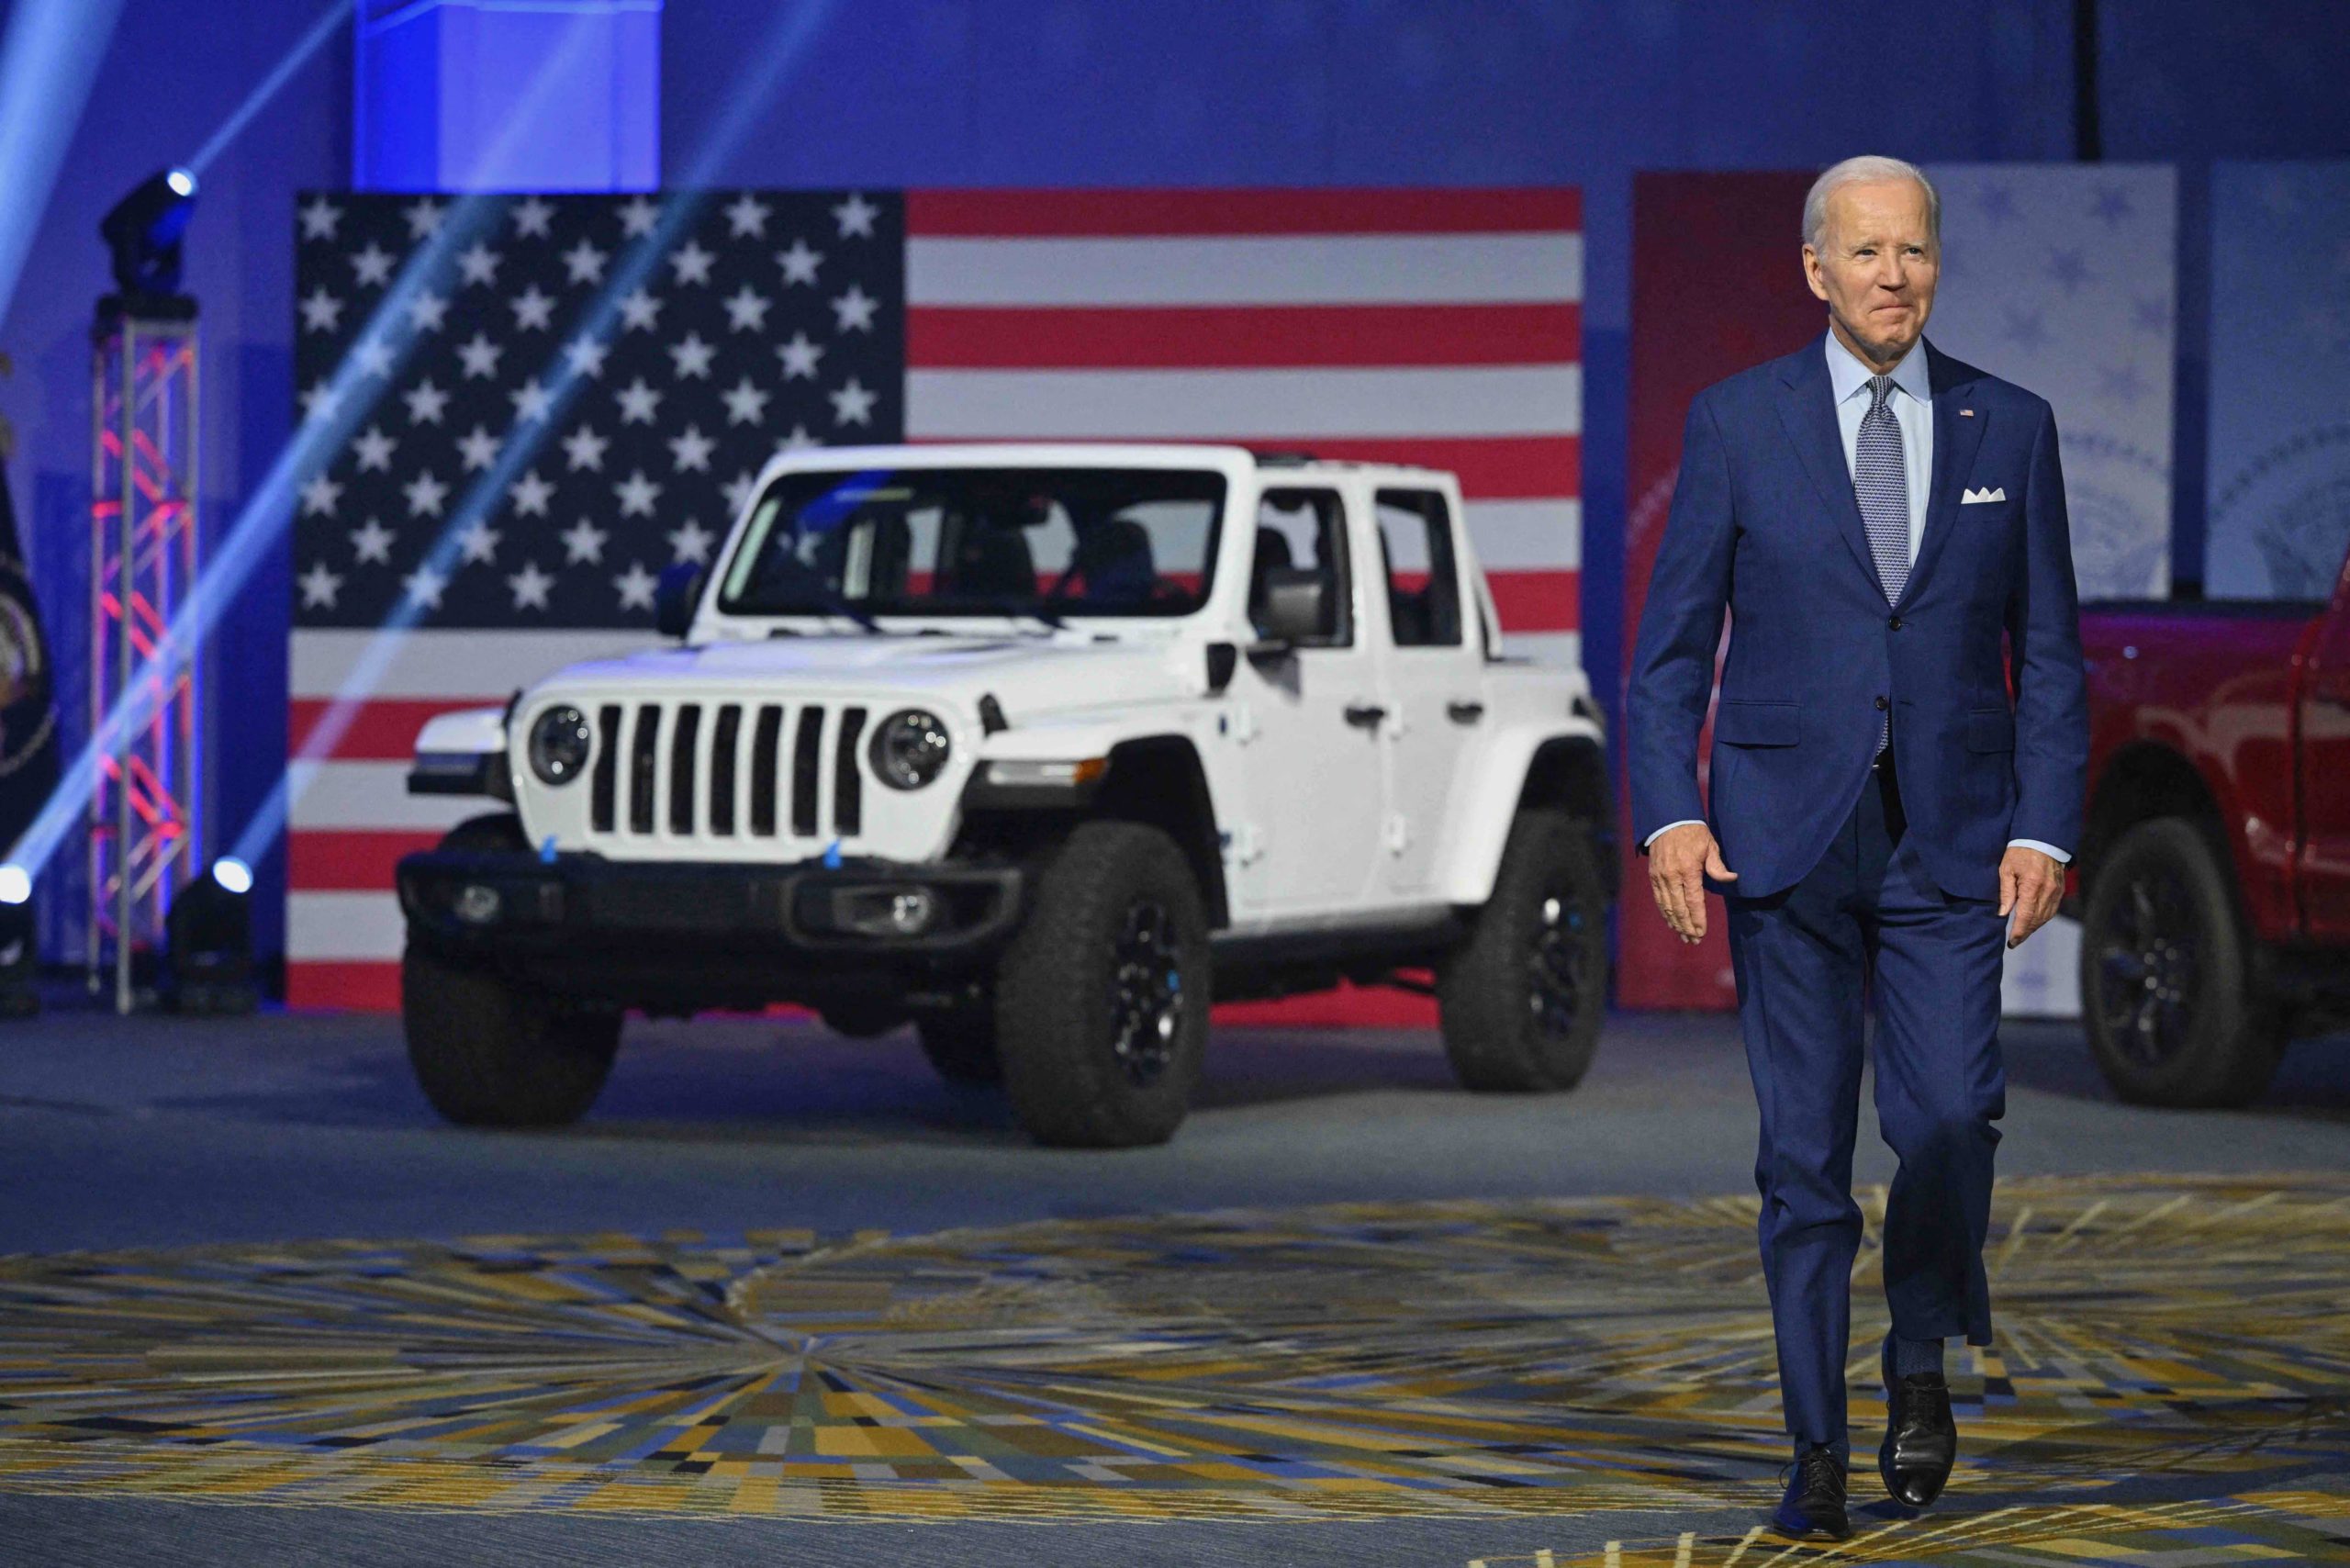 US President Joe Biden arrives to speak at the 2022 North American International Auto Show in Detroit, Michigan, on September 14, 2022. - Biden visited the auto show to highlight electric vehicle manufacturing. (Photo by MANDEL NGAN/AFP via Getty Images)